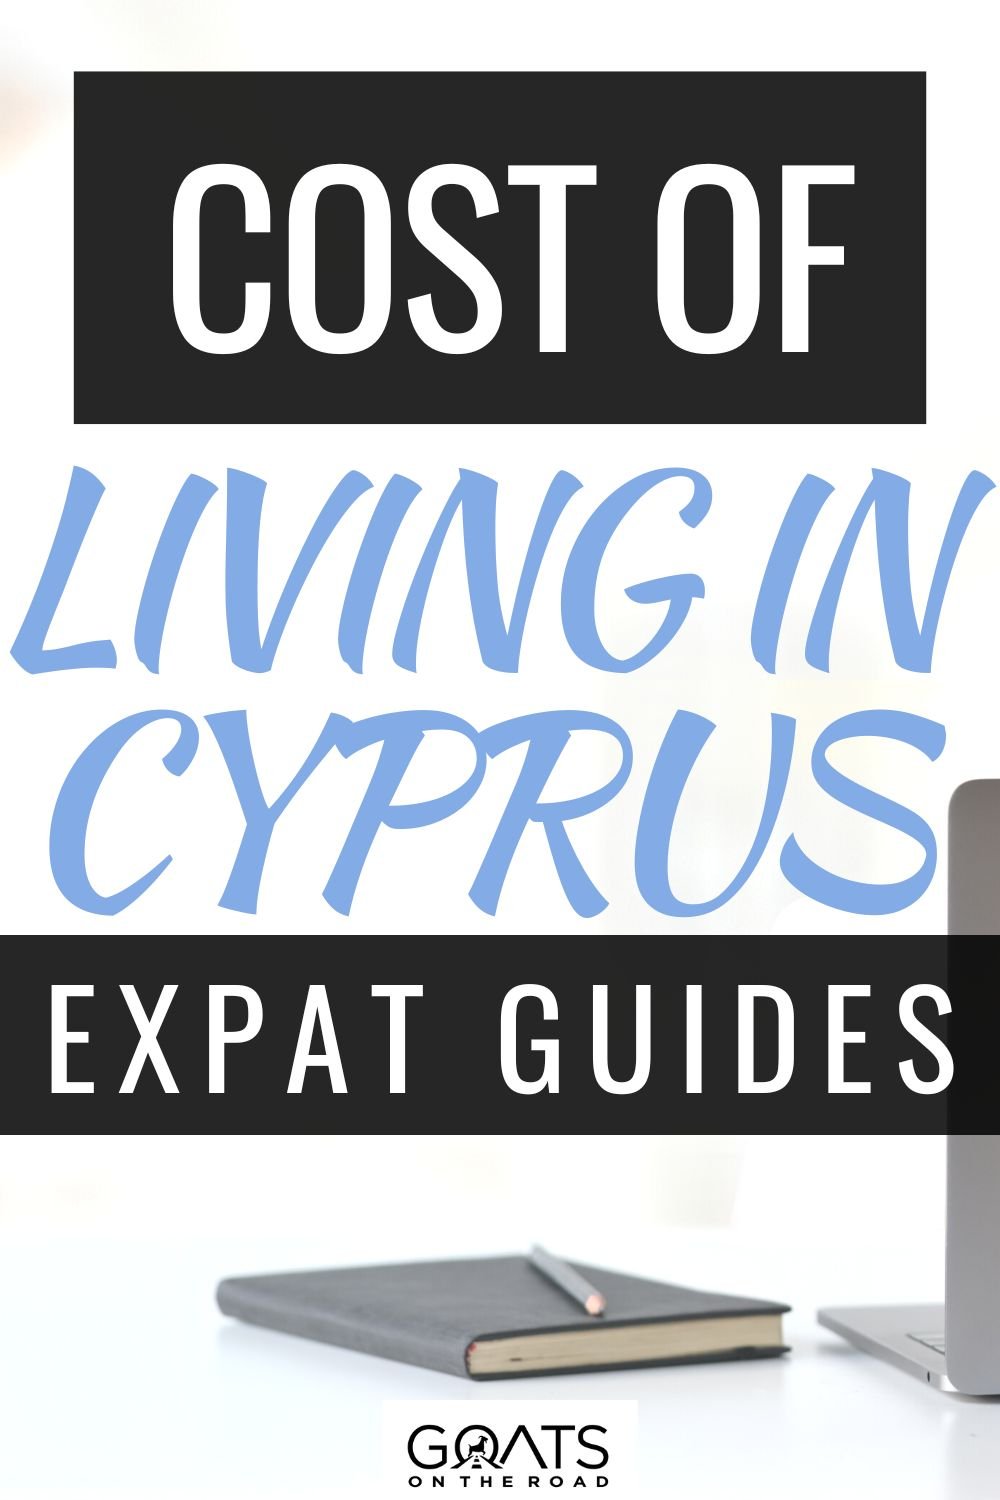 Expat Guides: Cost of Living in Cyprus